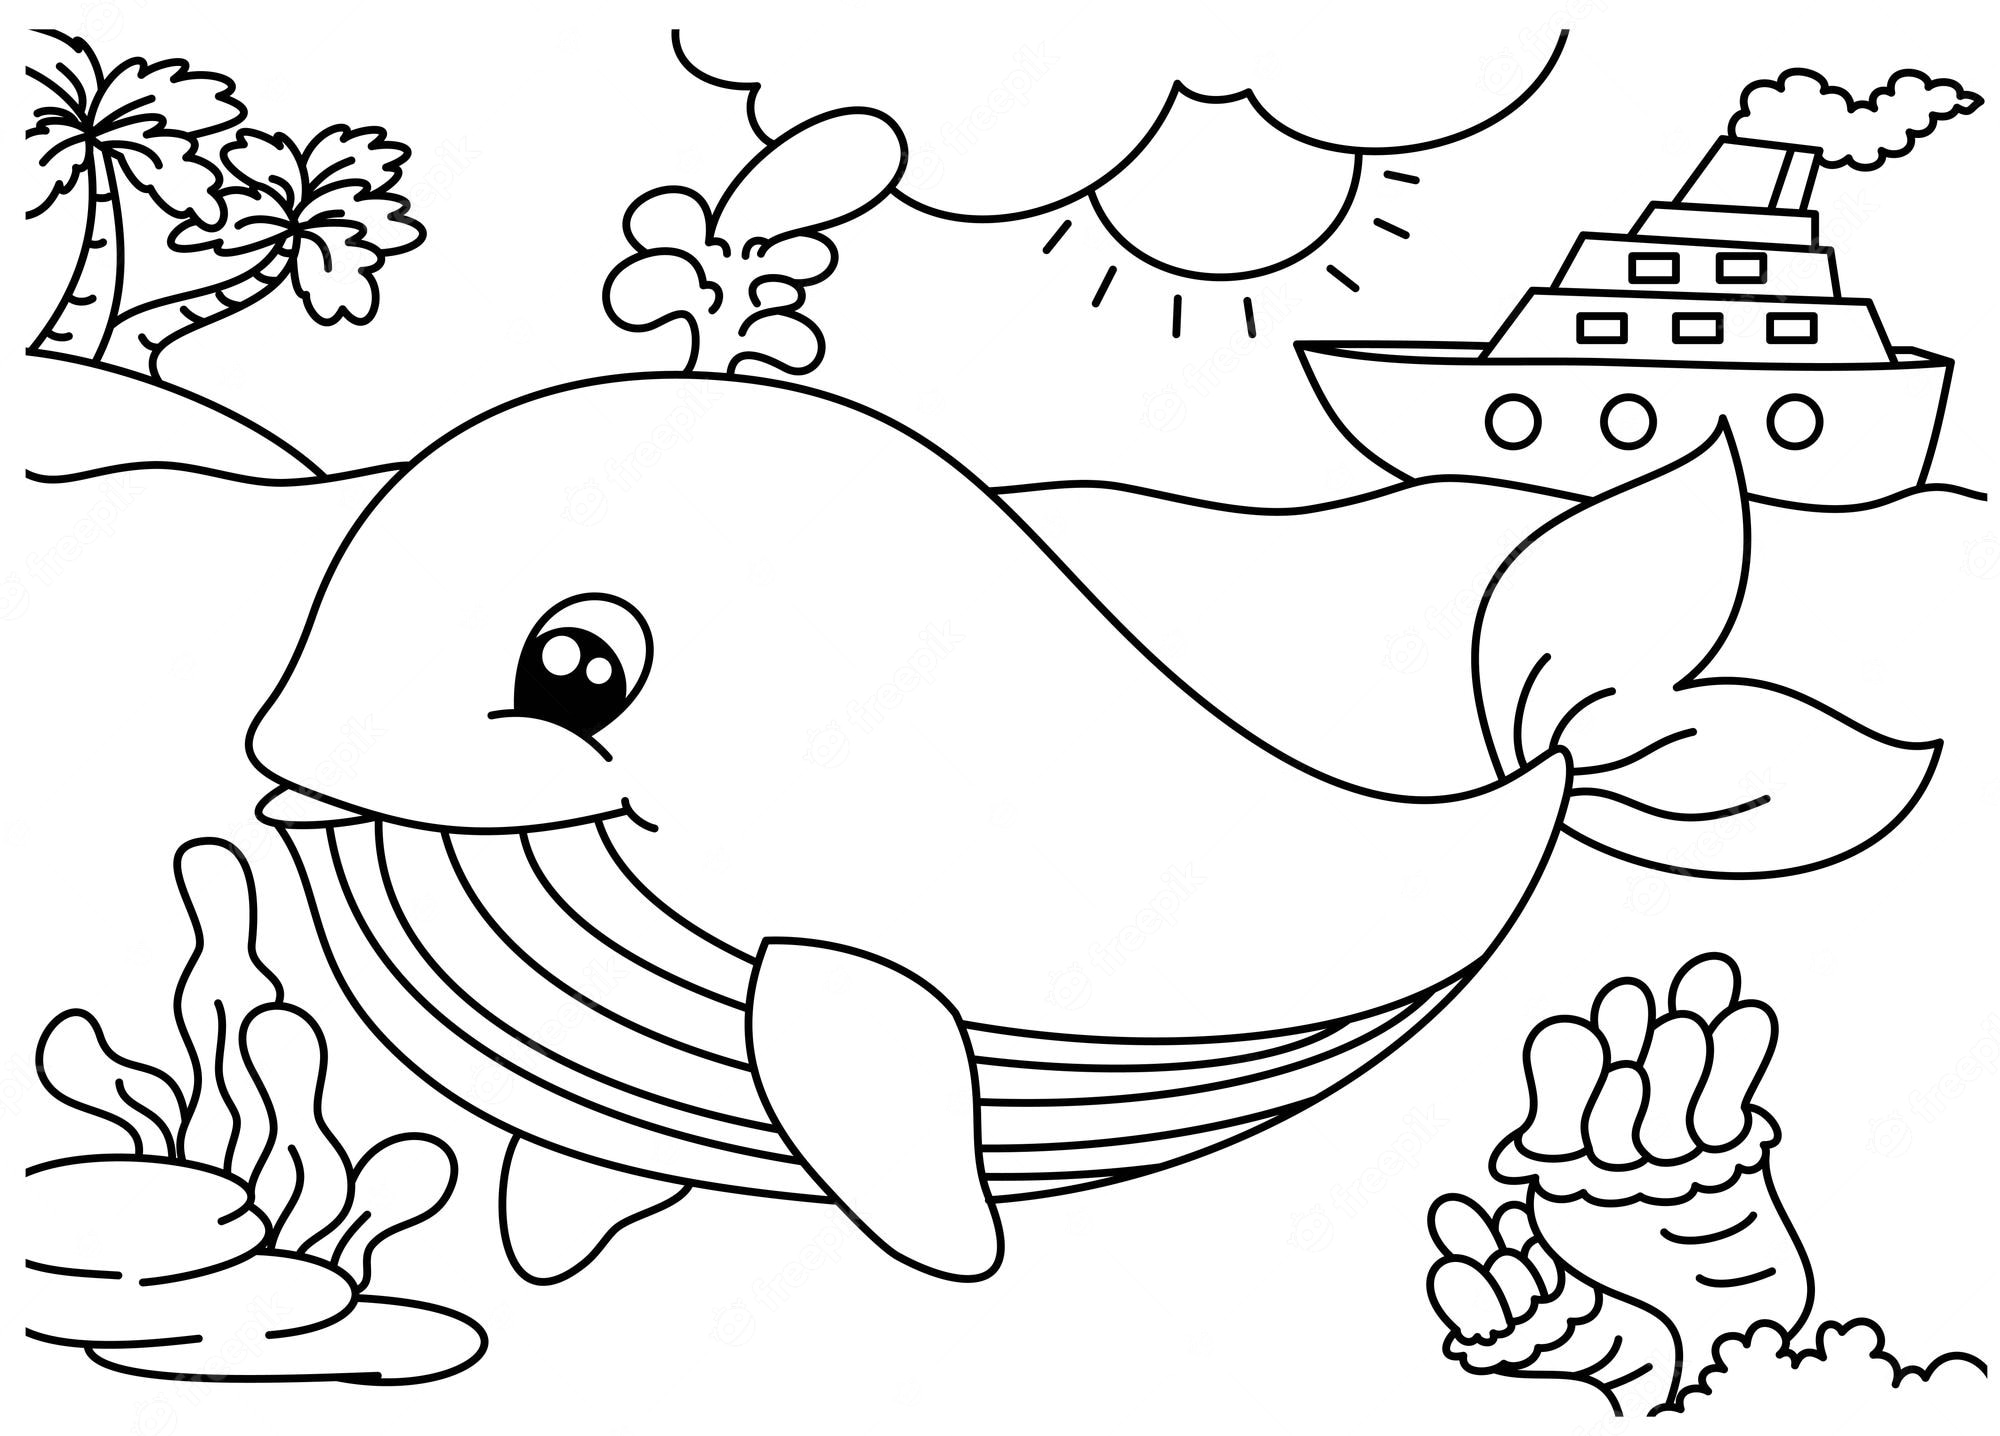 10 Cute Coloring Pages! - The Graphics Fairy